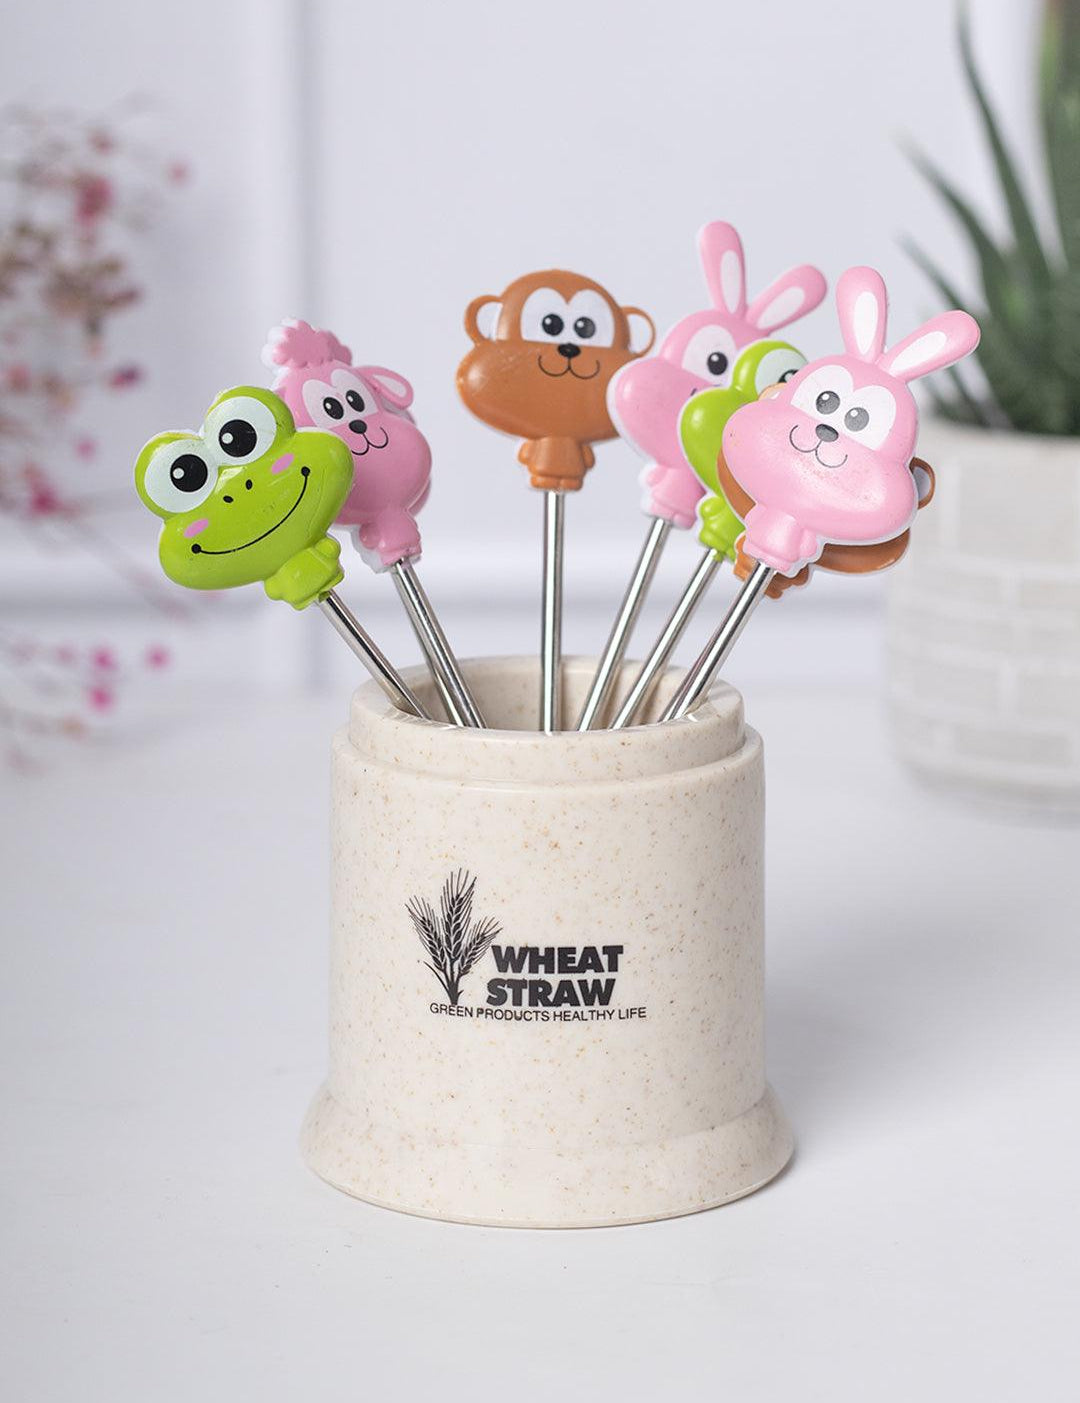 Colorful Plastic Fruit Forks with Adorable Animal Faces - Pack of 7 - MARKET 99